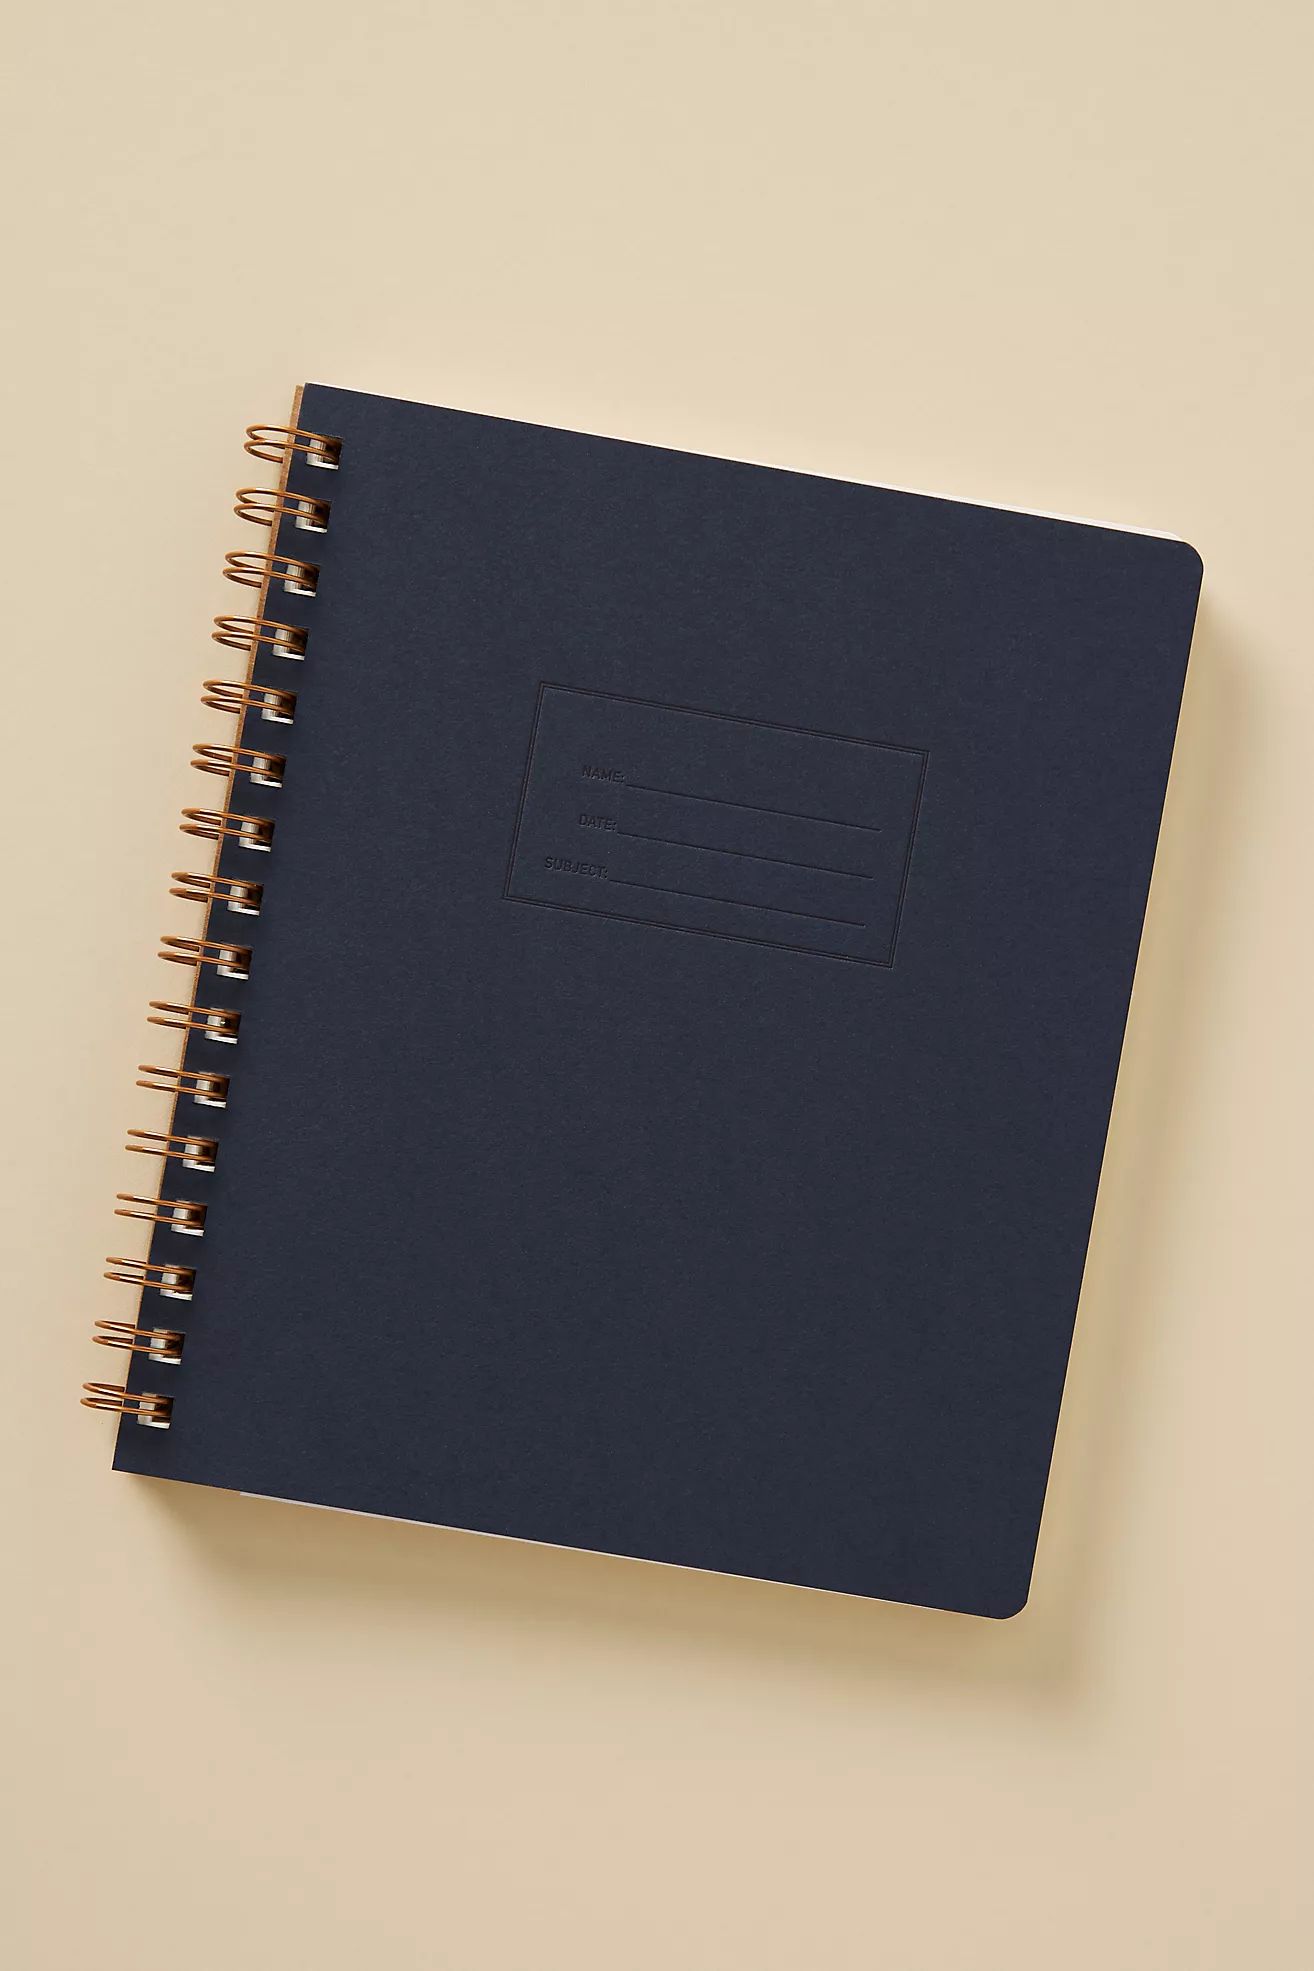 Shorthand Press The Standard Notebook | Anthropologie (US)